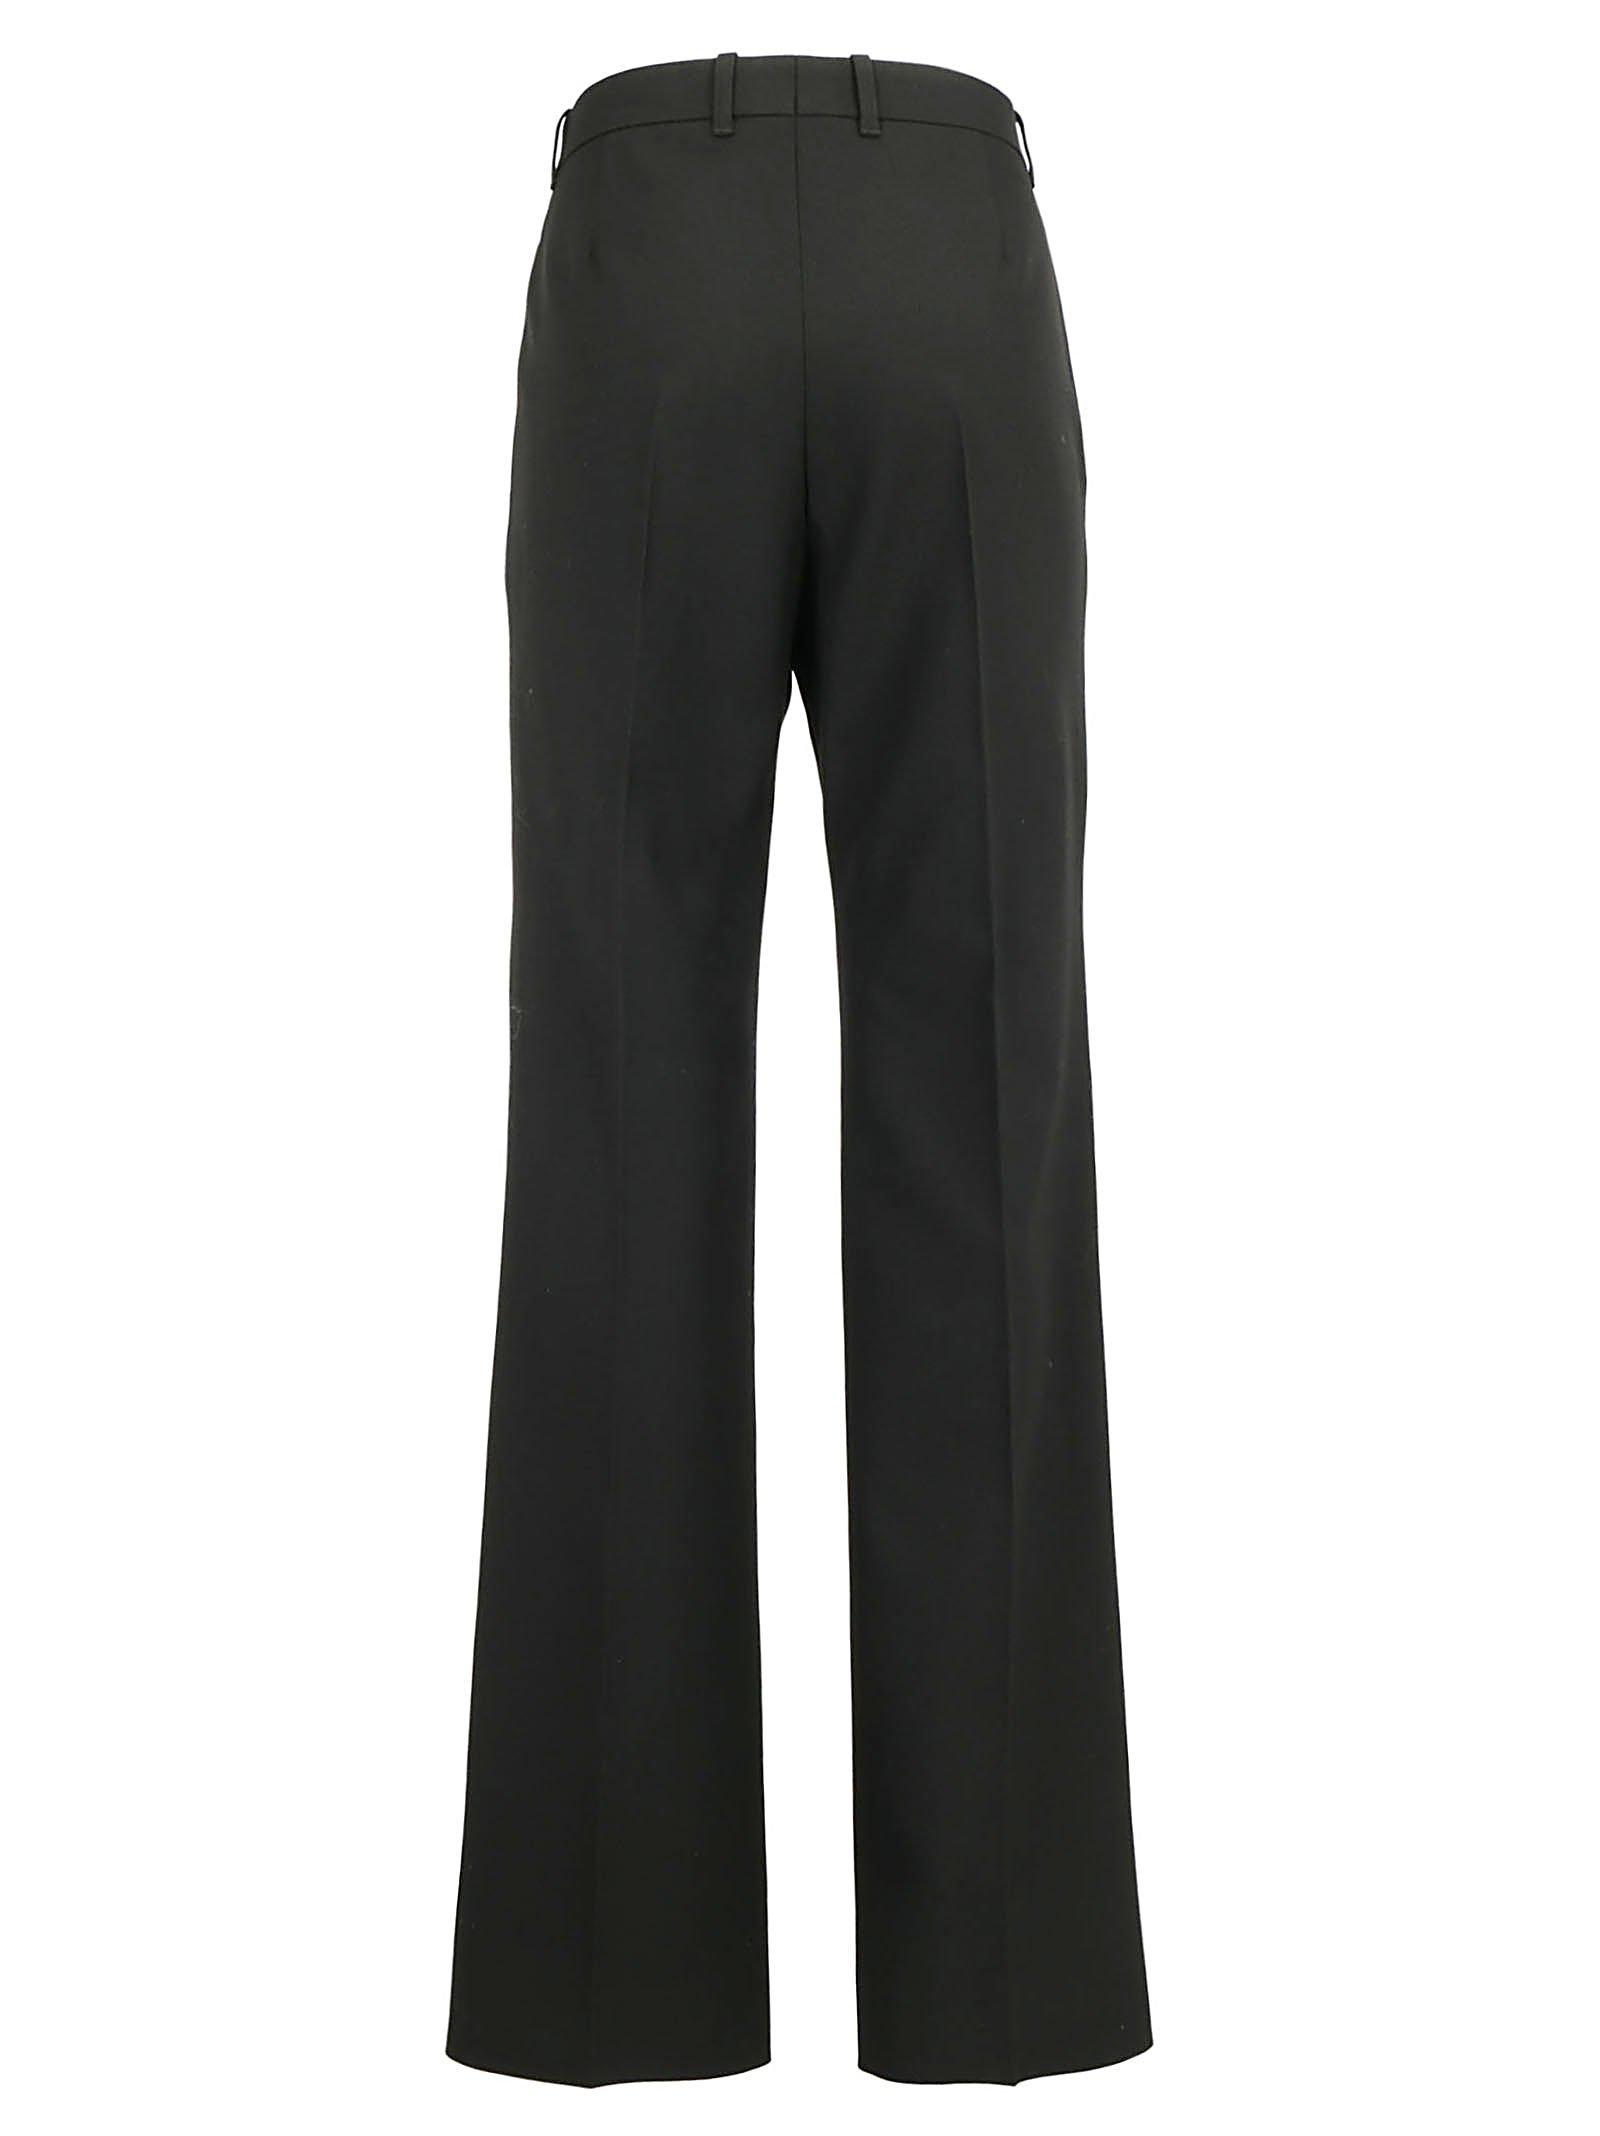 Balenciaga Wool High-waisted Tailored Trousers in Black - Lyst